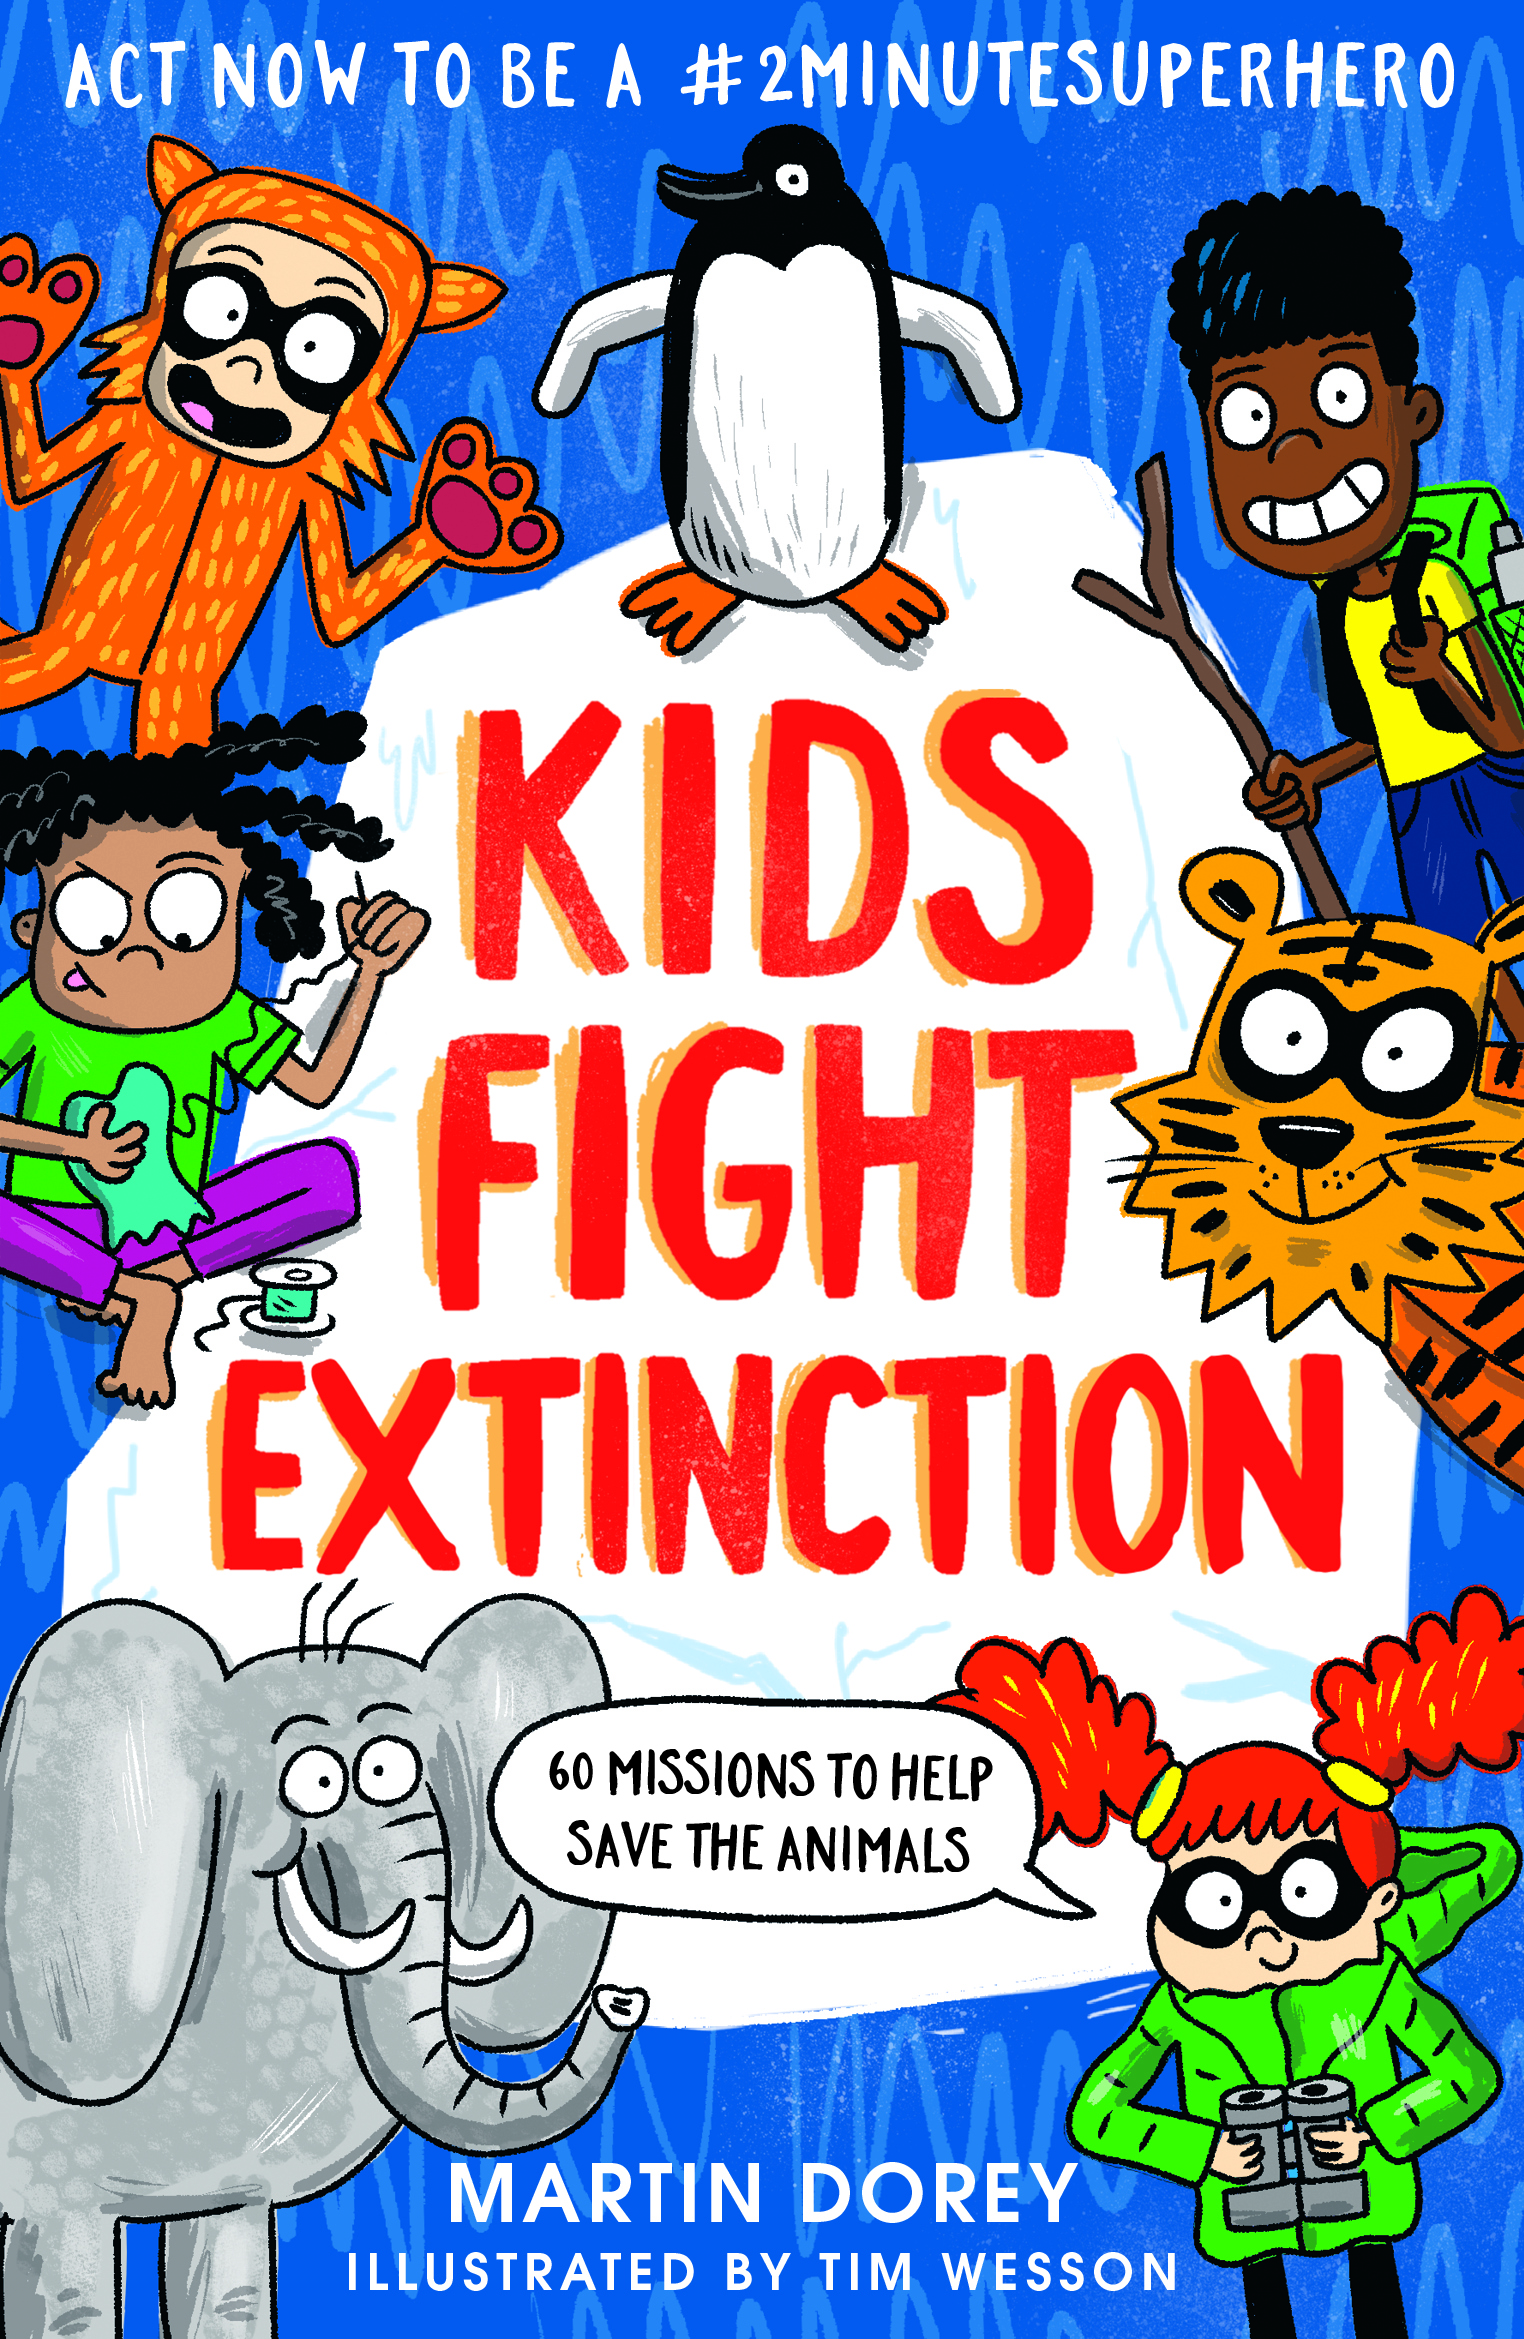 Kids-Fight-Extinction-How-to-be-a-2minutesuperhero